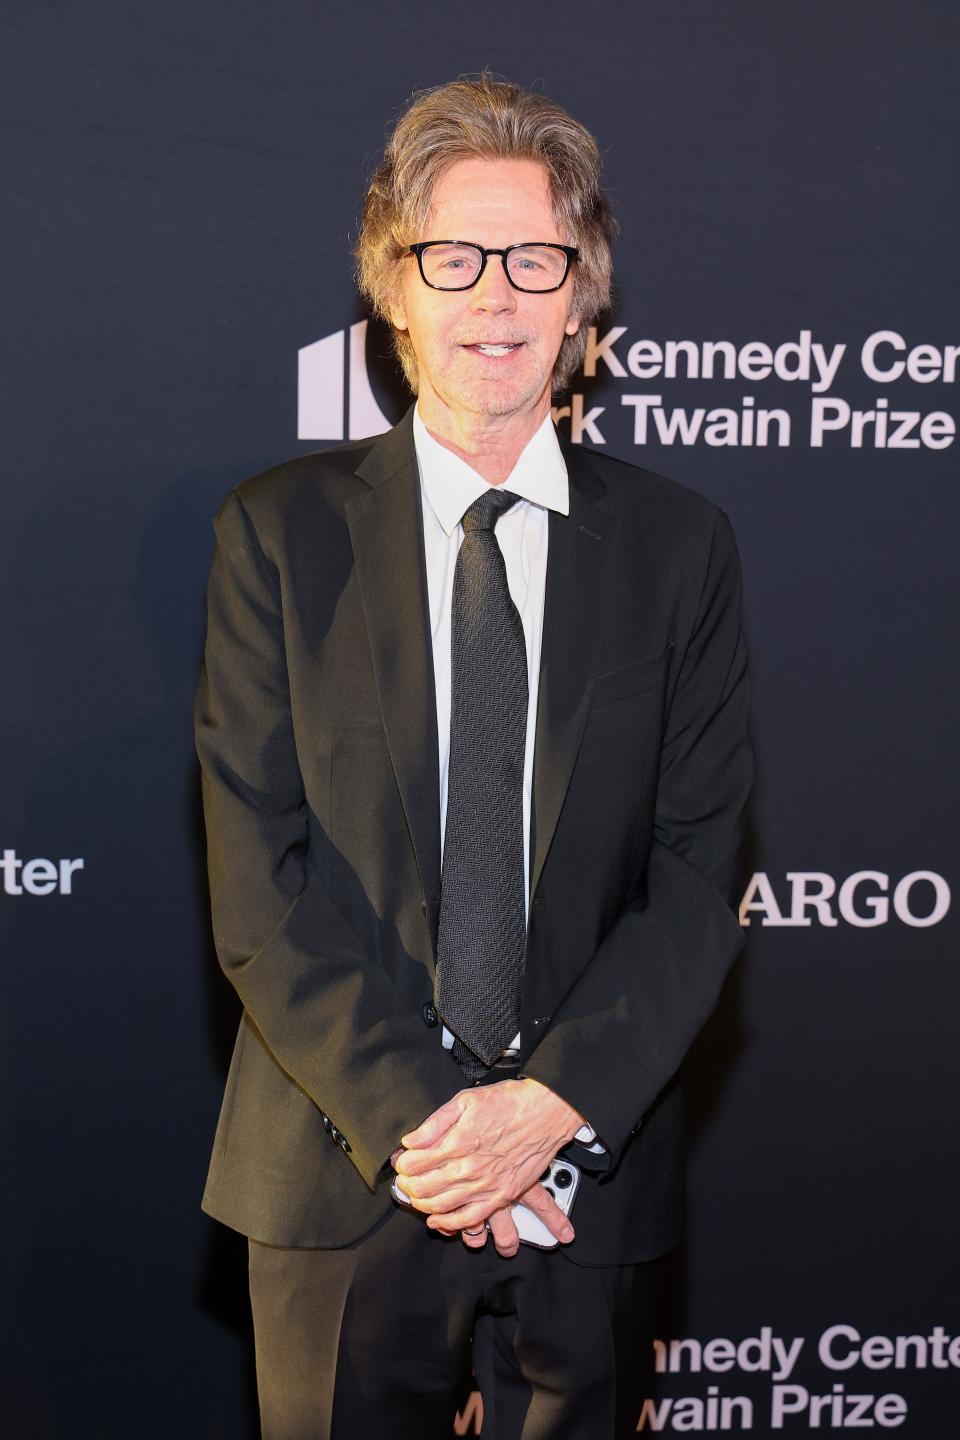 Comedian Dana Carvey, whose son Dex died of an accidental drug overdose last year, opened up about his grieving process in a recent podcast interview.